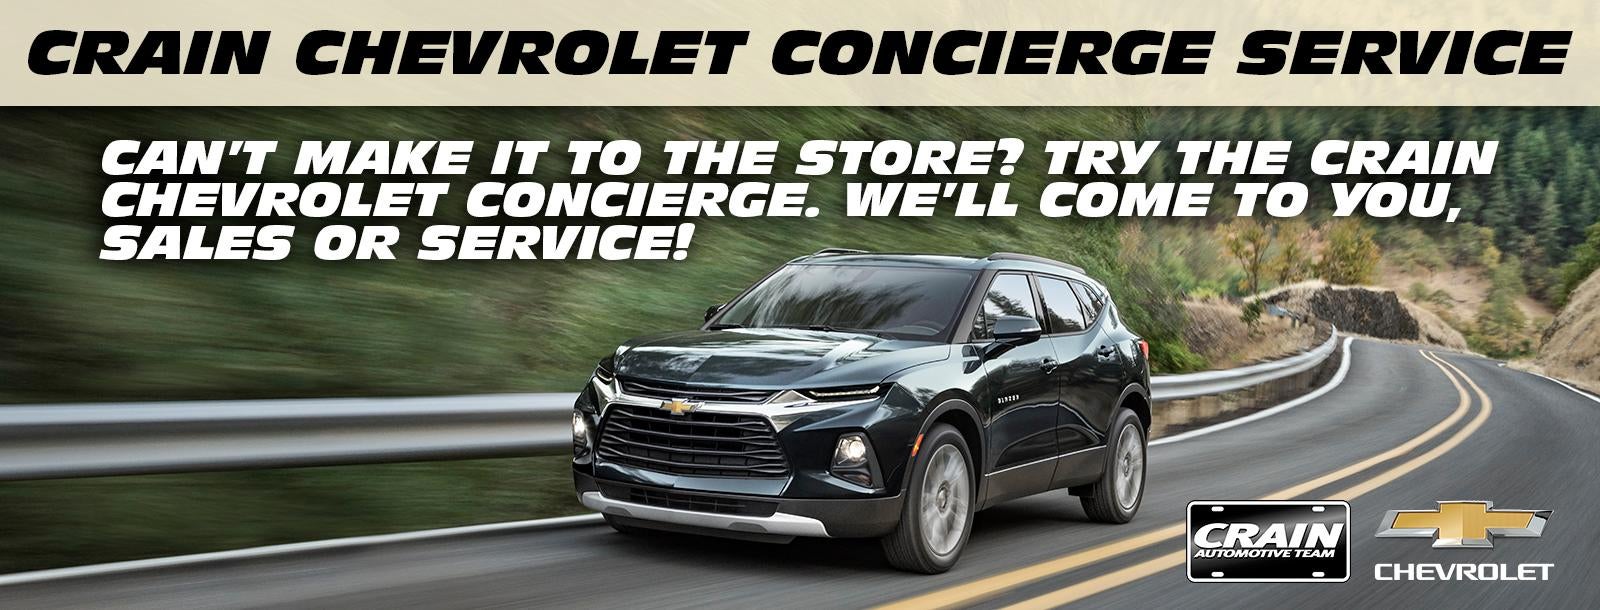 Crain Chevrolet Concierge Service. Can't make it to the store? Try the Crain Chevrolet Concierge. We'll come to you, sales or service!